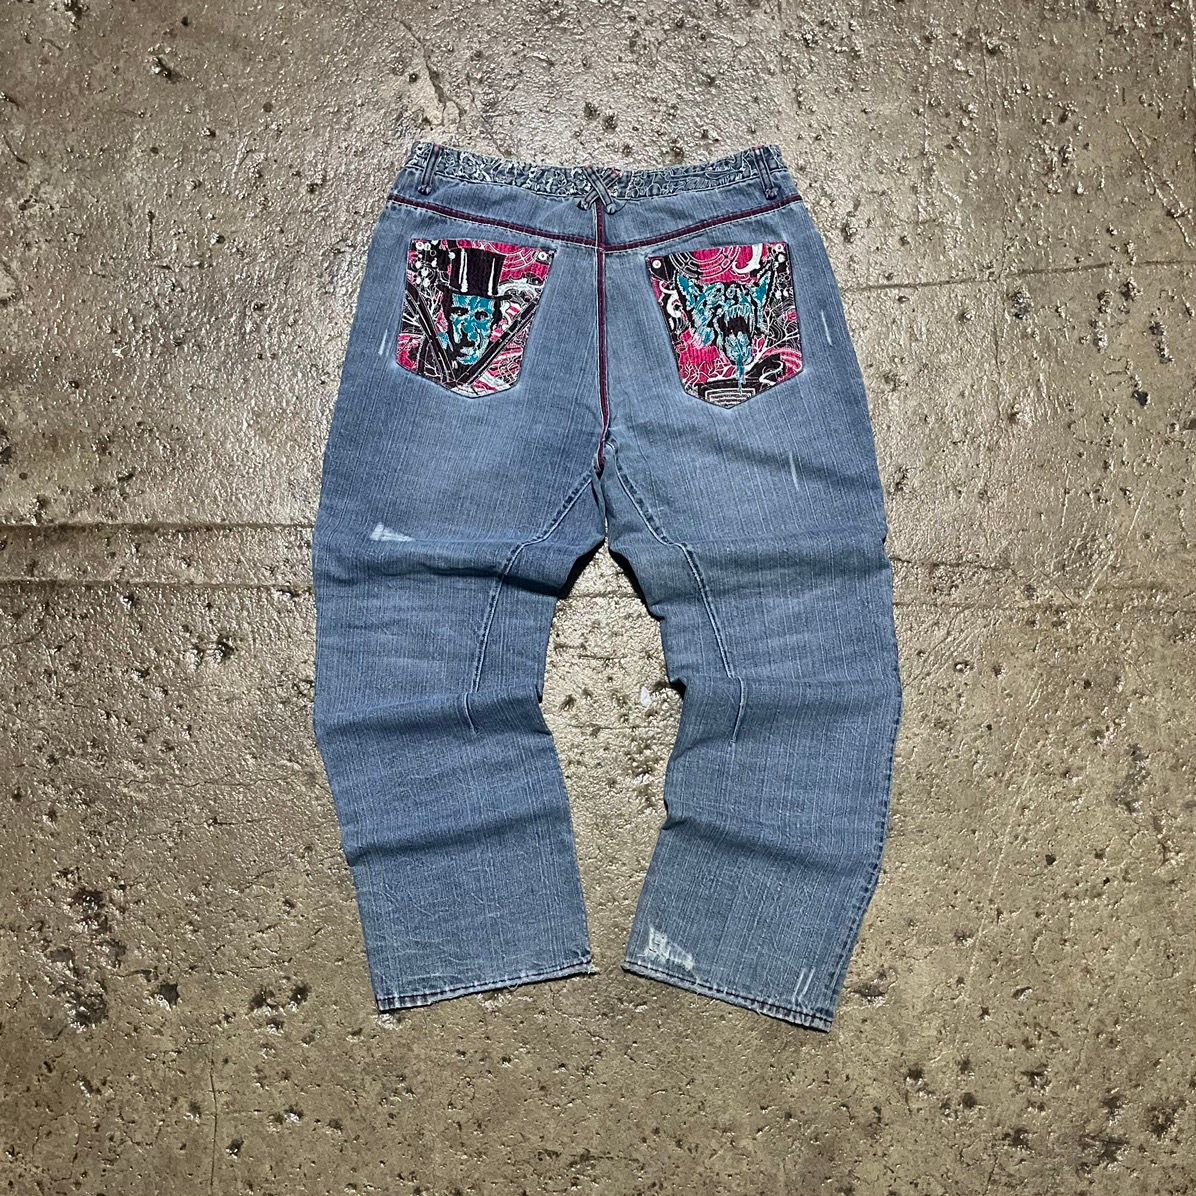 Pre-owned Ed Hardy X Jnco Crazy Vintage Y2k Baggy Jeans Jnco Wide Leg Skater Unique In Blue